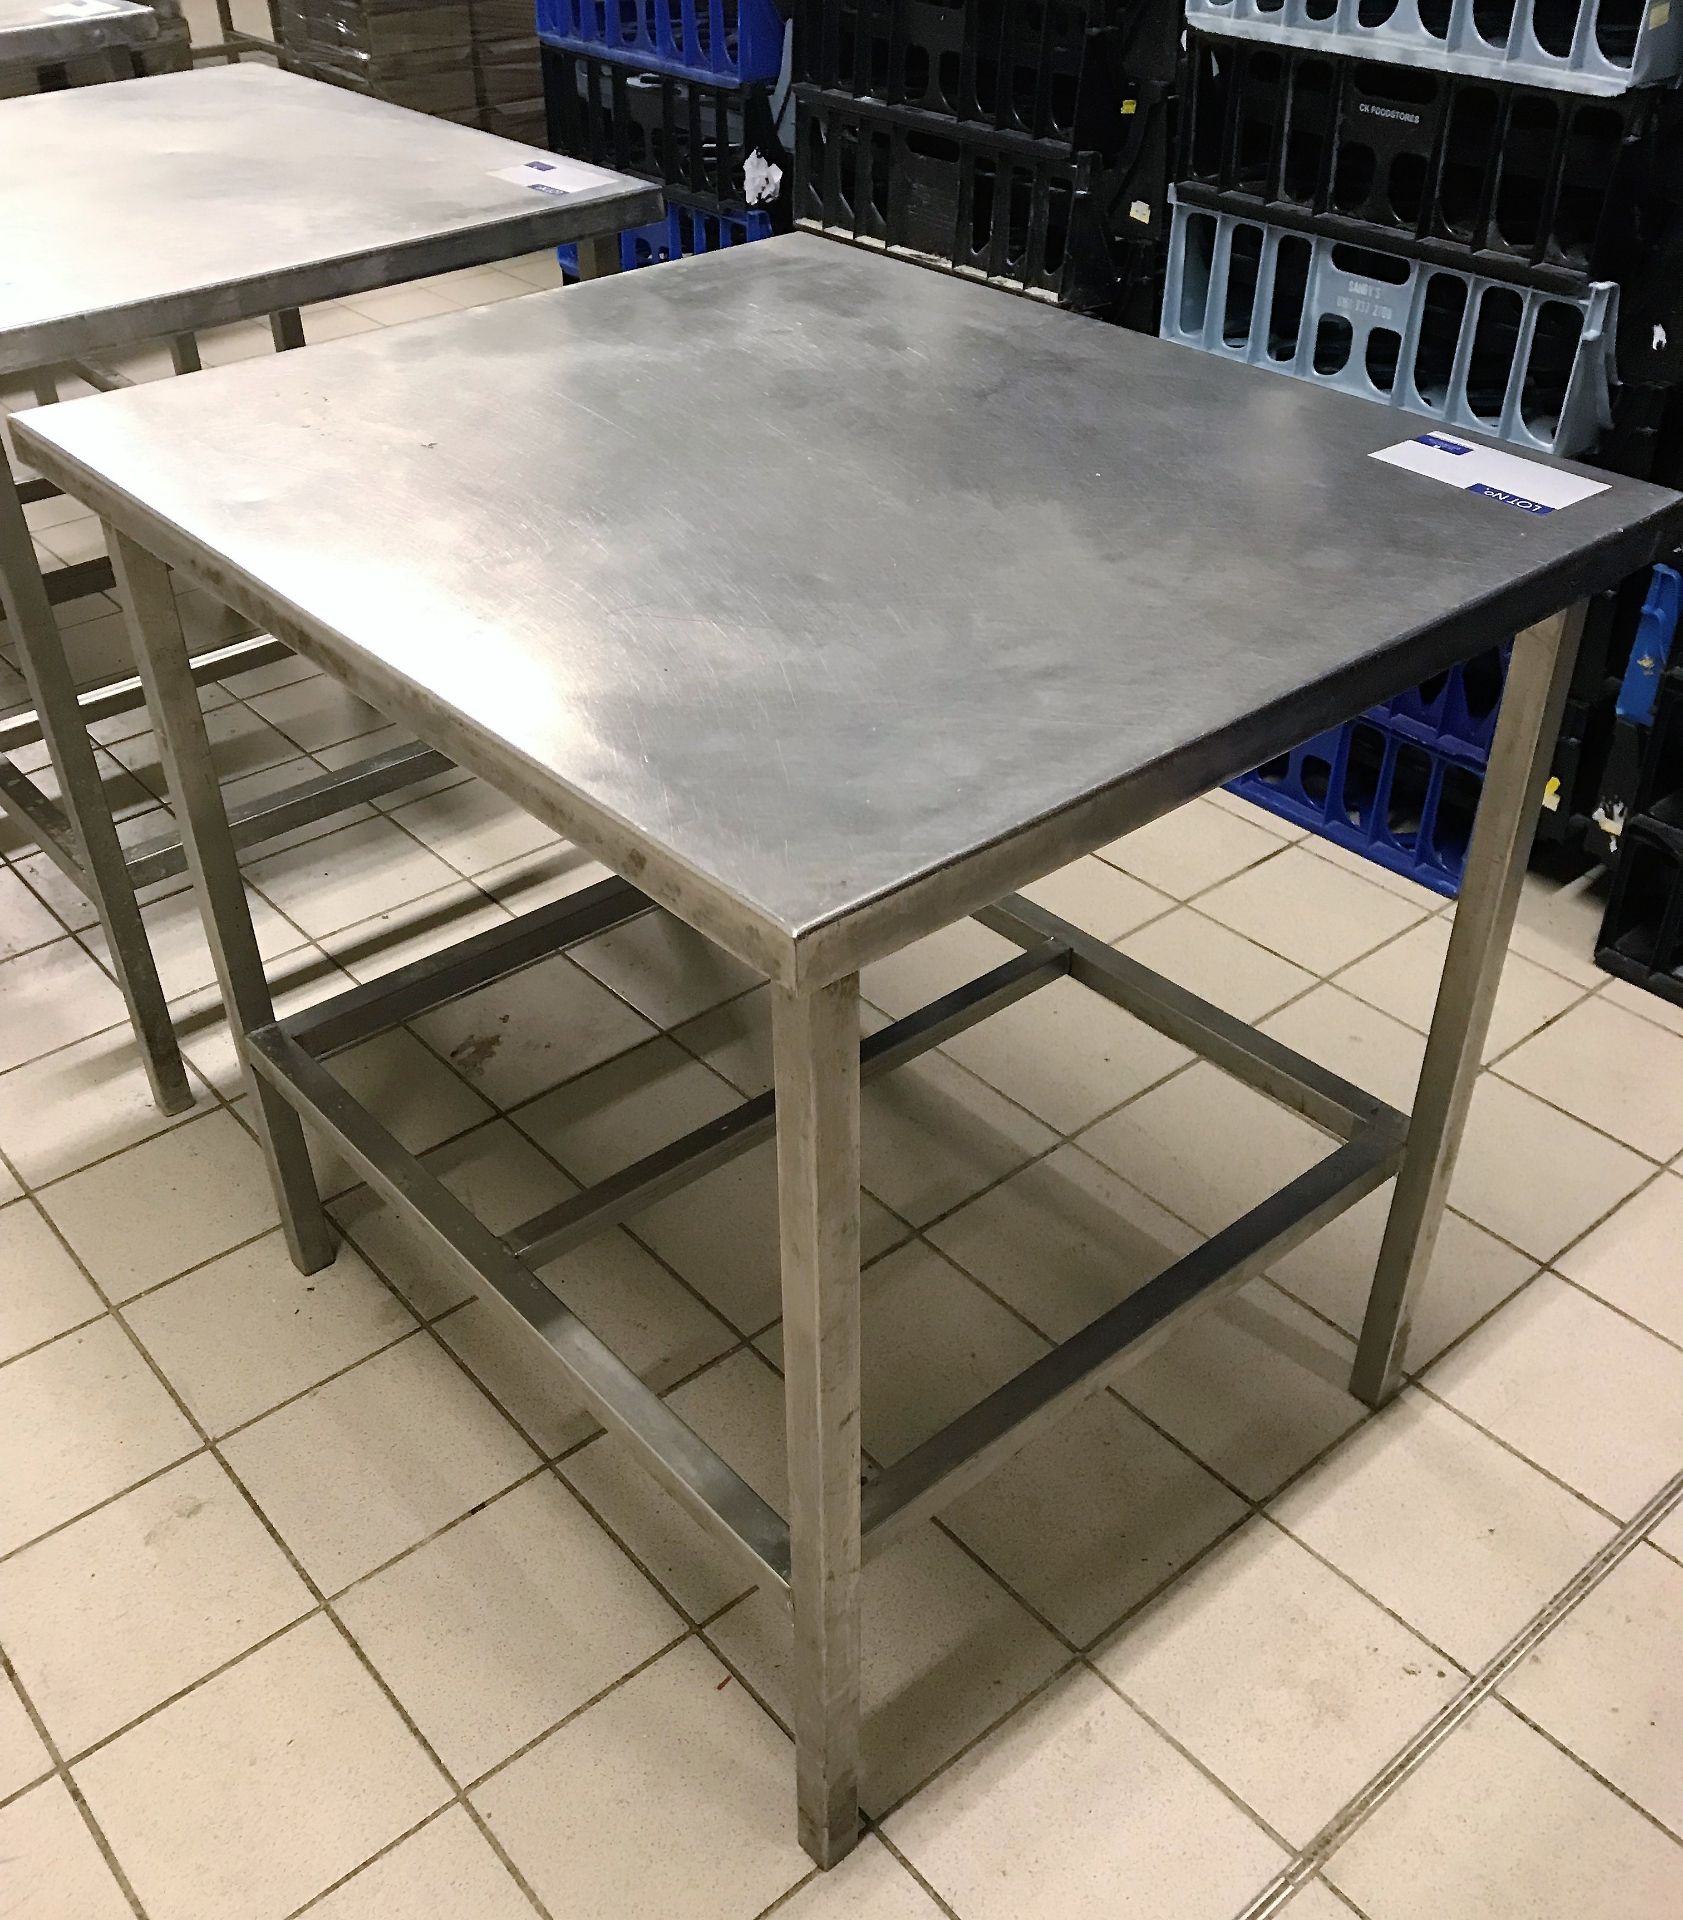 A Stainless Steel Work Bench, 33in x 27in x 32in h.